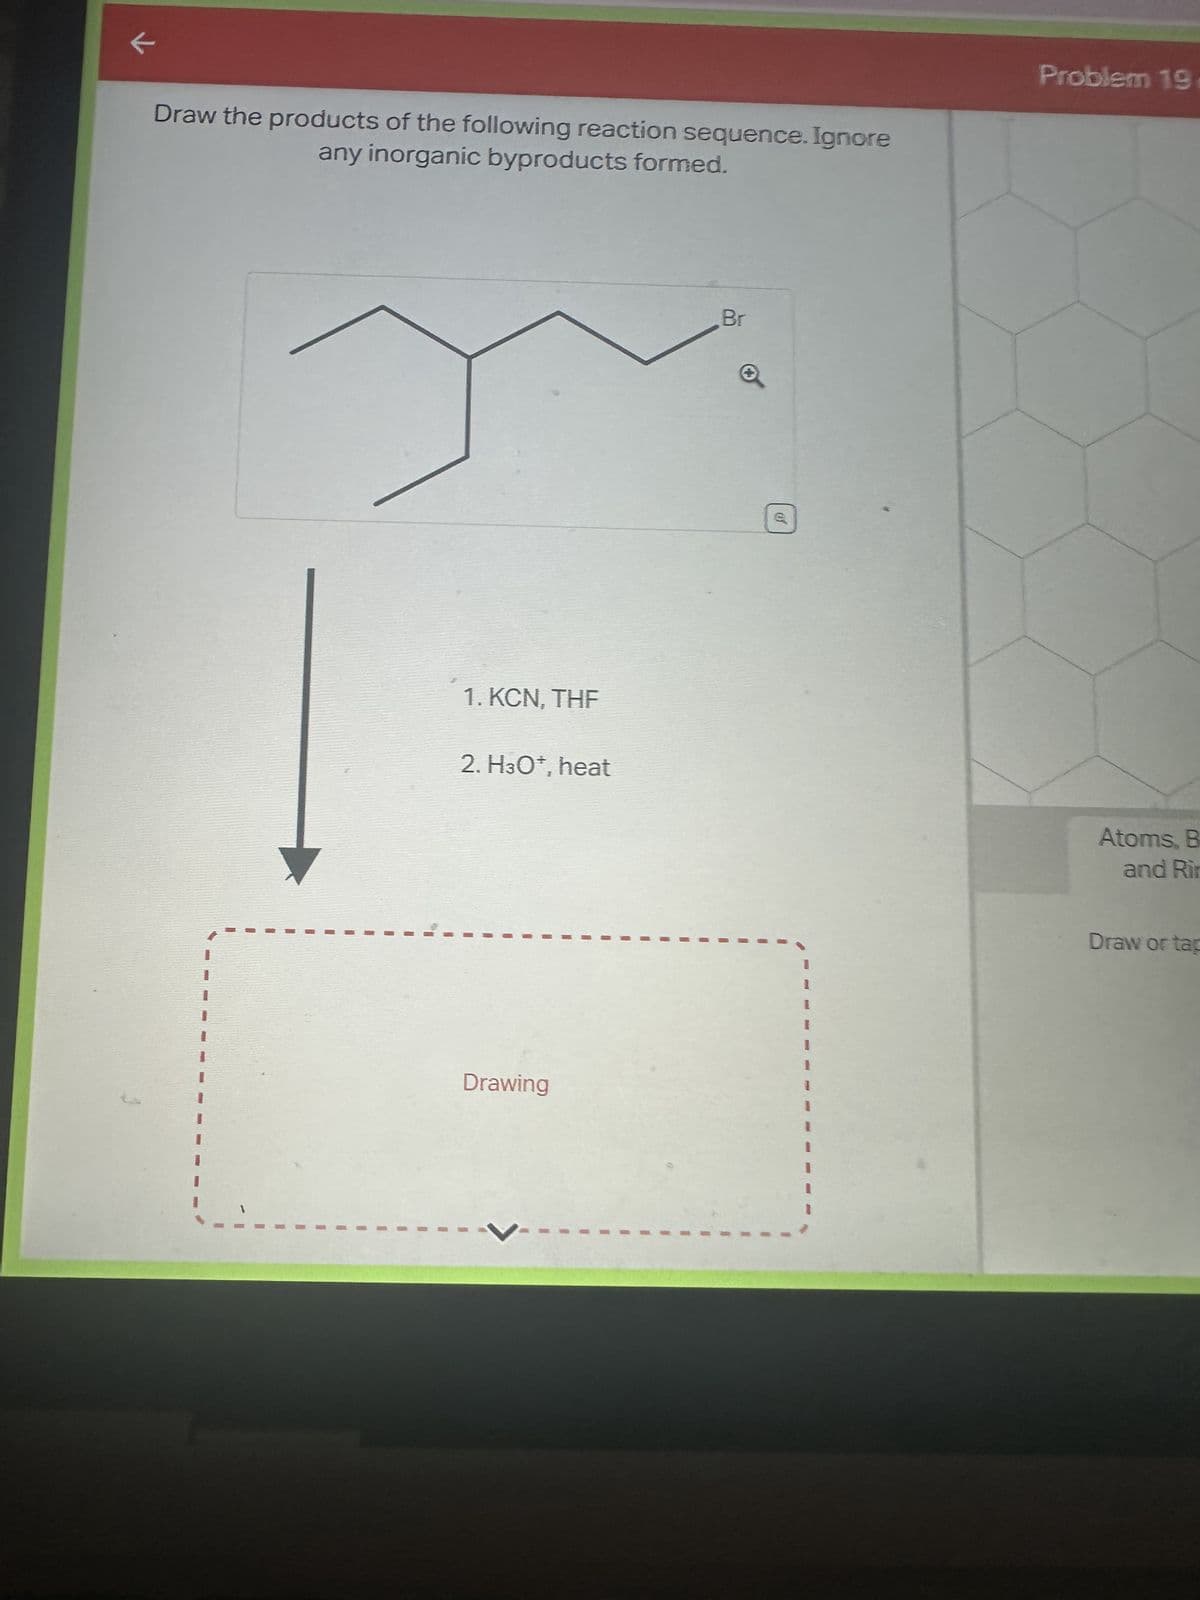 k
Draw the products of the following reaction sequence. Ignore
any inorganic byproducts formed.
1. KCN. THE
2. H3O*, heat
Drawing
Br
Problem 19
Atoms, B
and Rin
Draw or tap